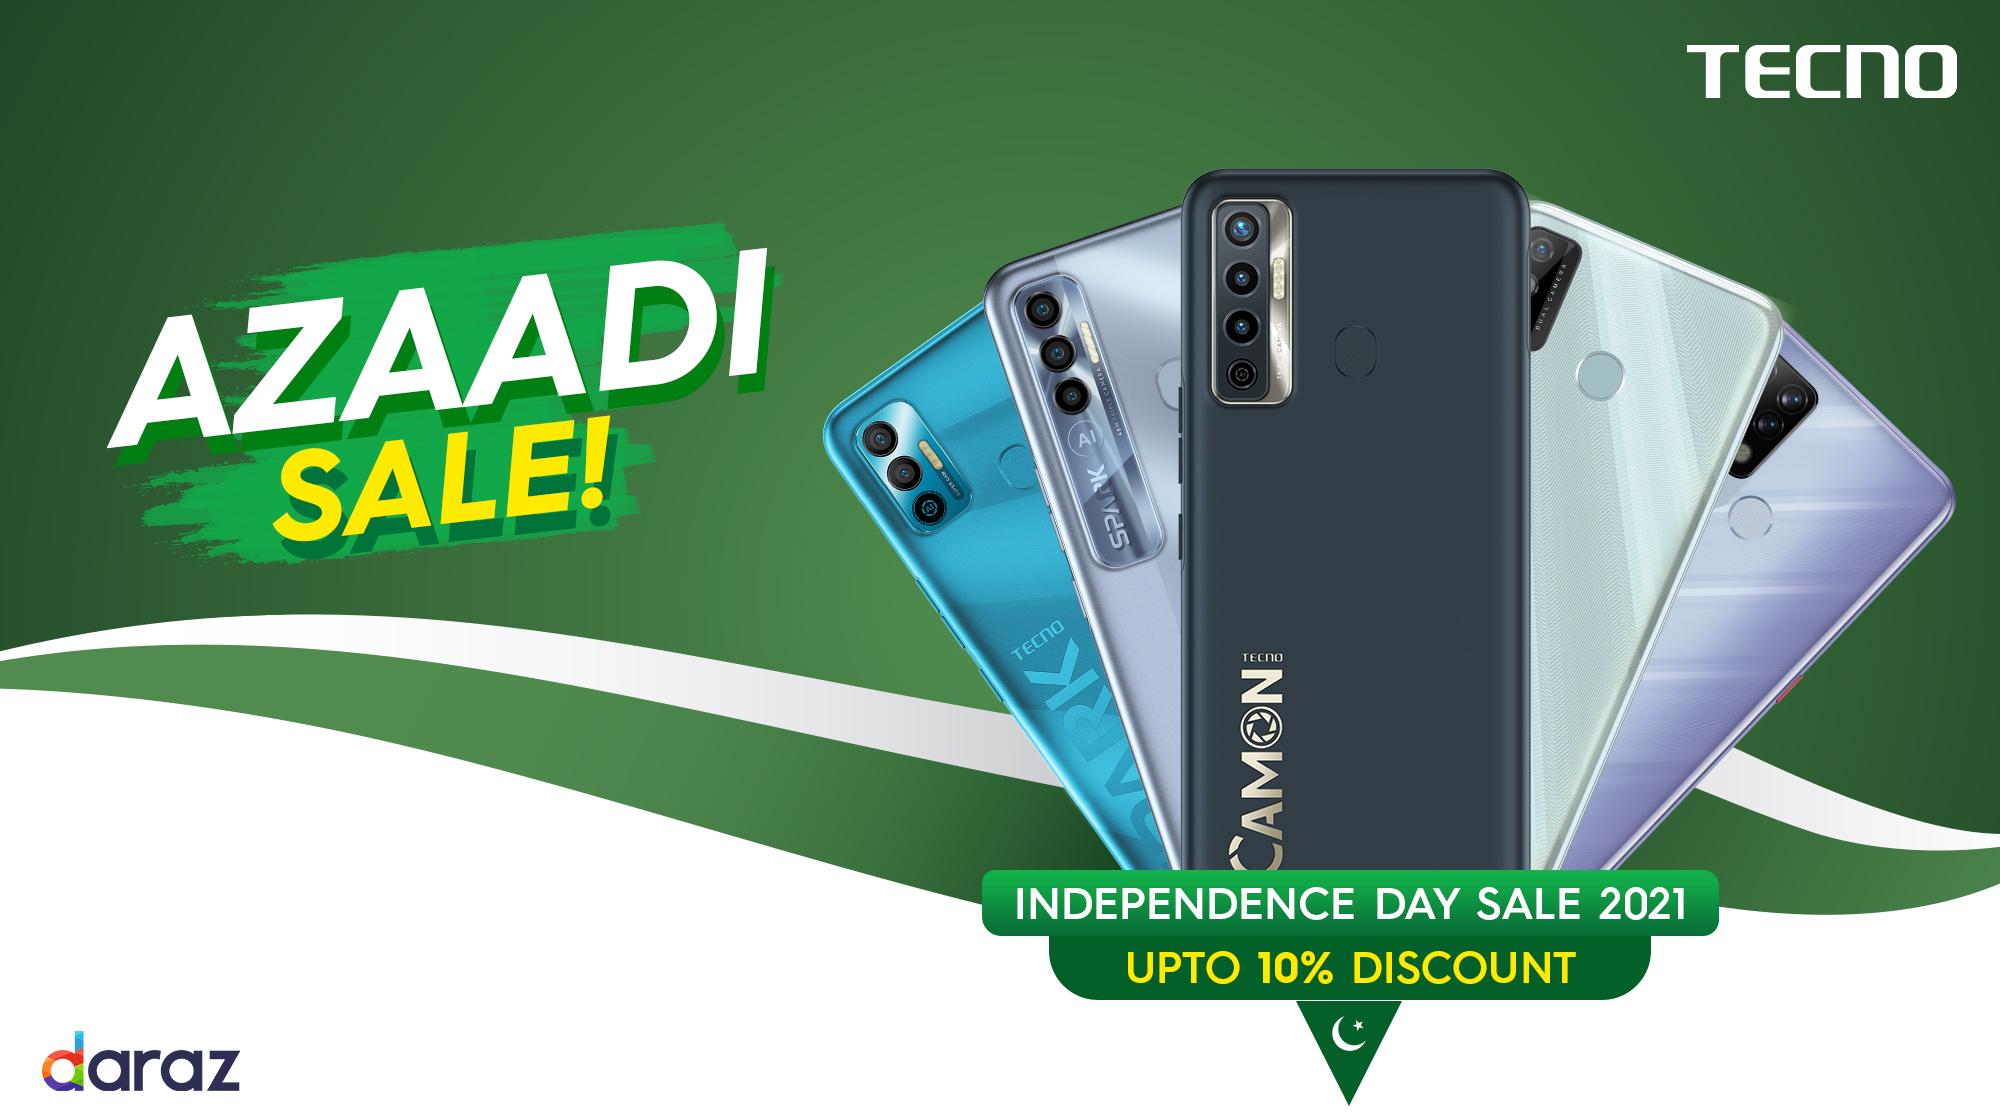 TECNO all set for Daraz Independence Day Sale 2021